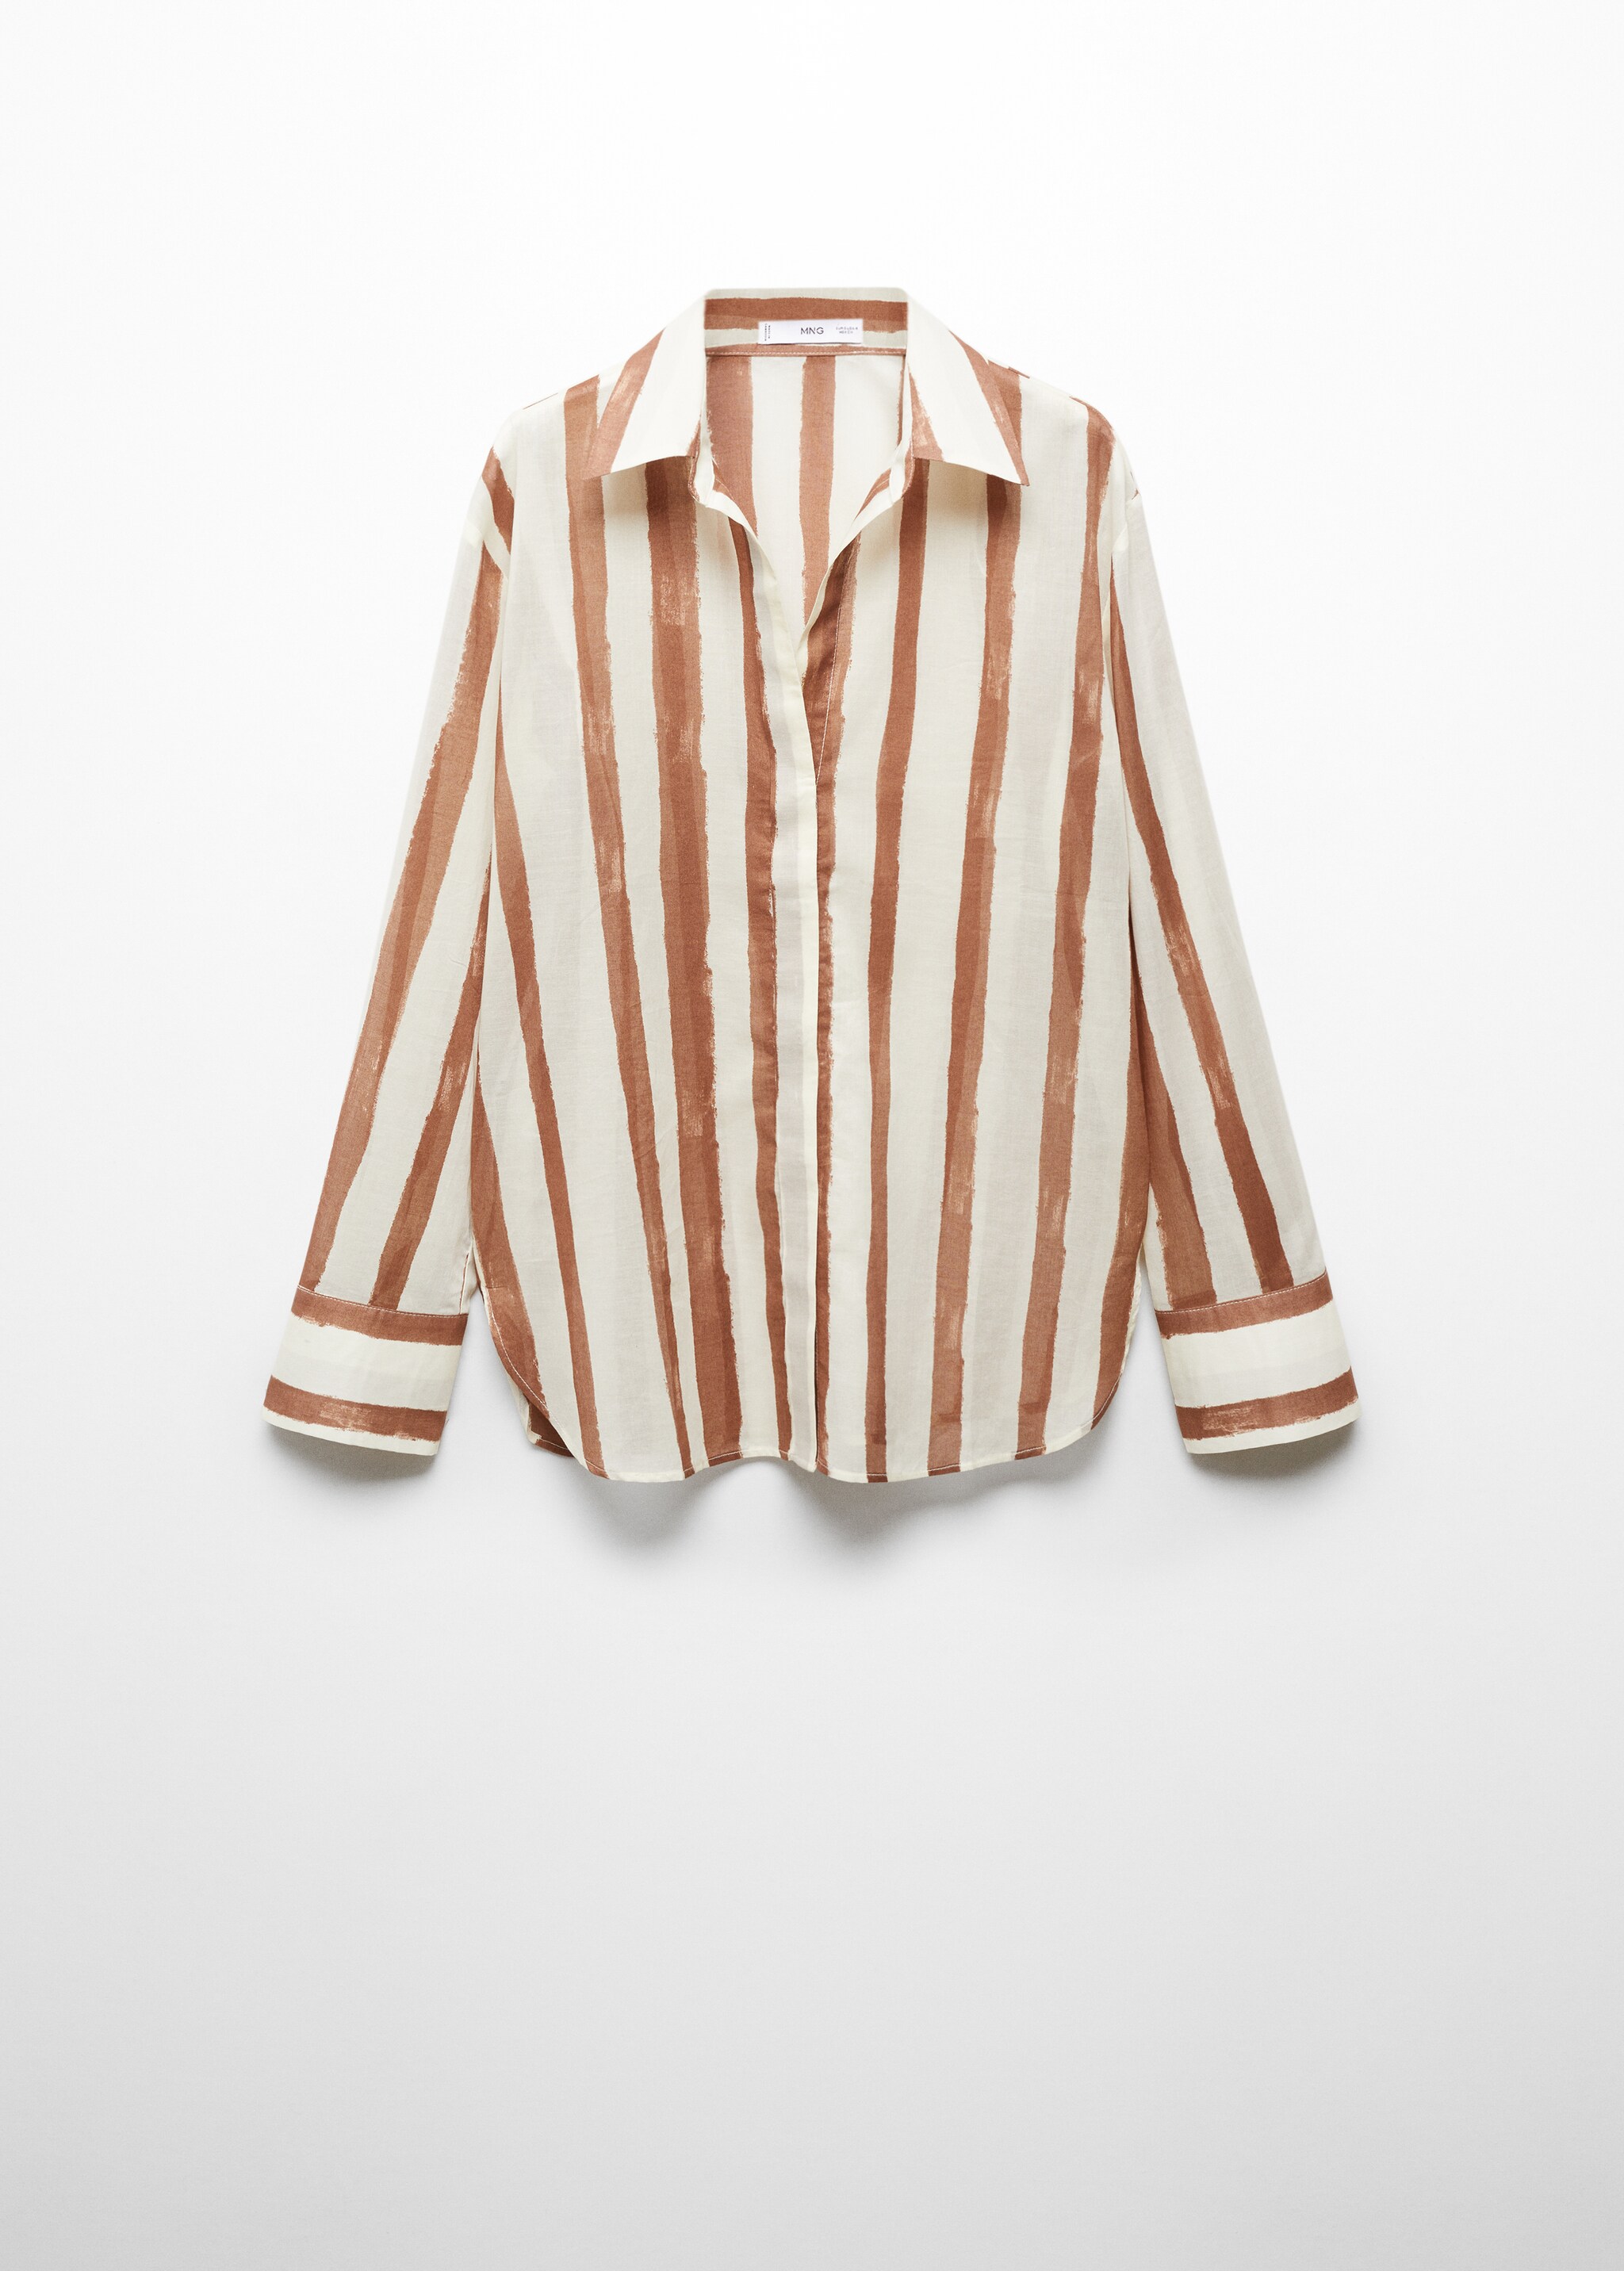 100% cotton striped shirt - Article without model